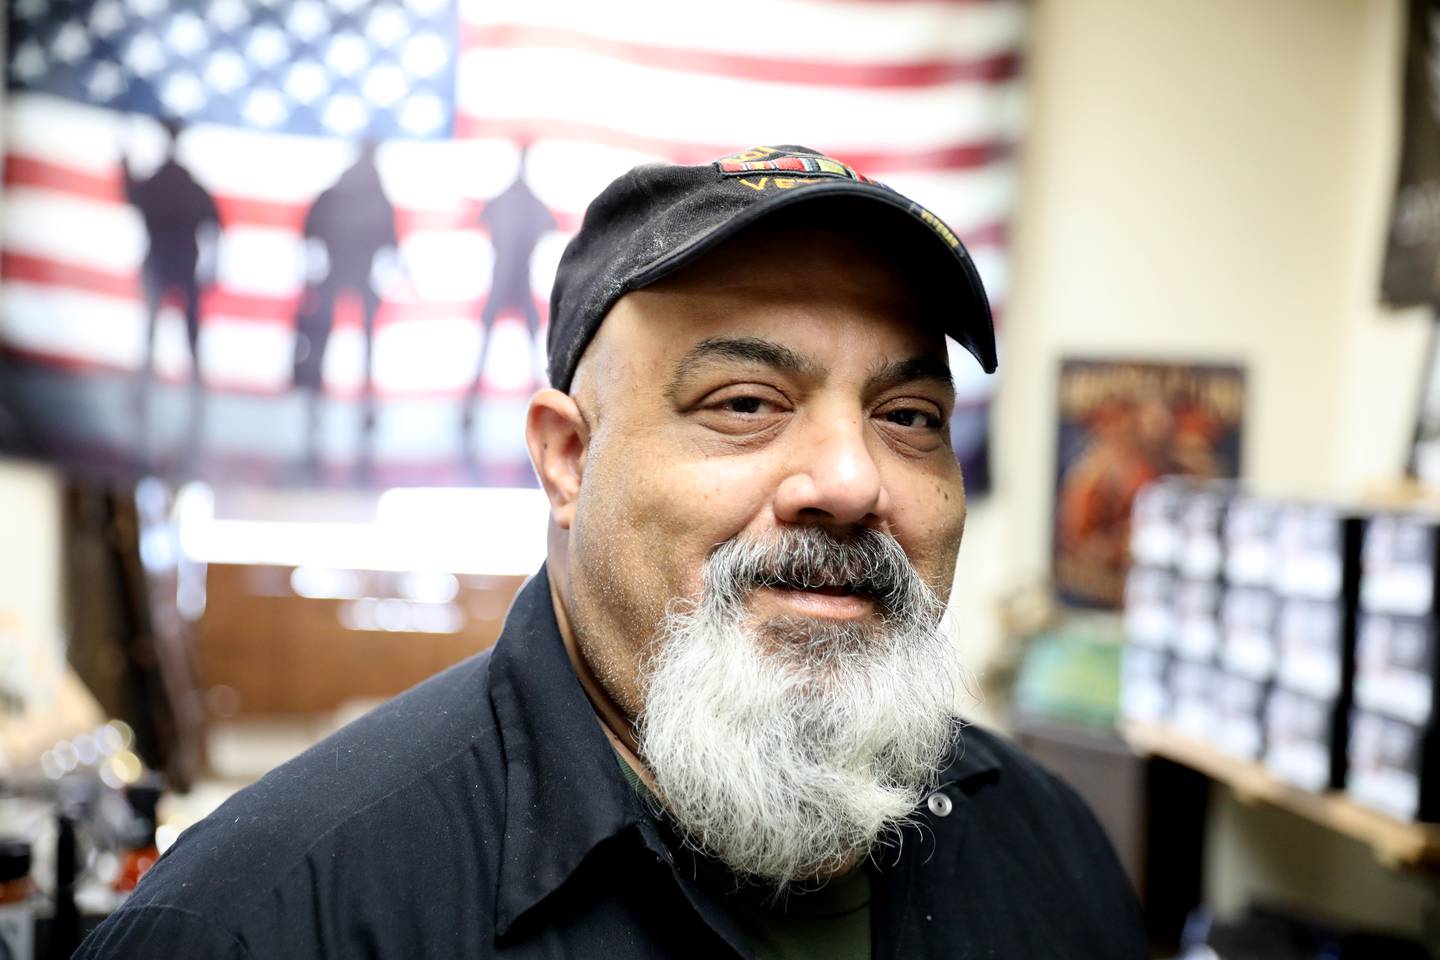 Army veteran Sal Dazzo spent time in Kuwait during the 1991 Gulf War and now owns Gun Barrel Coffee in Batavia. Dazzo’s coffee roasting company supports several veteran organizations.